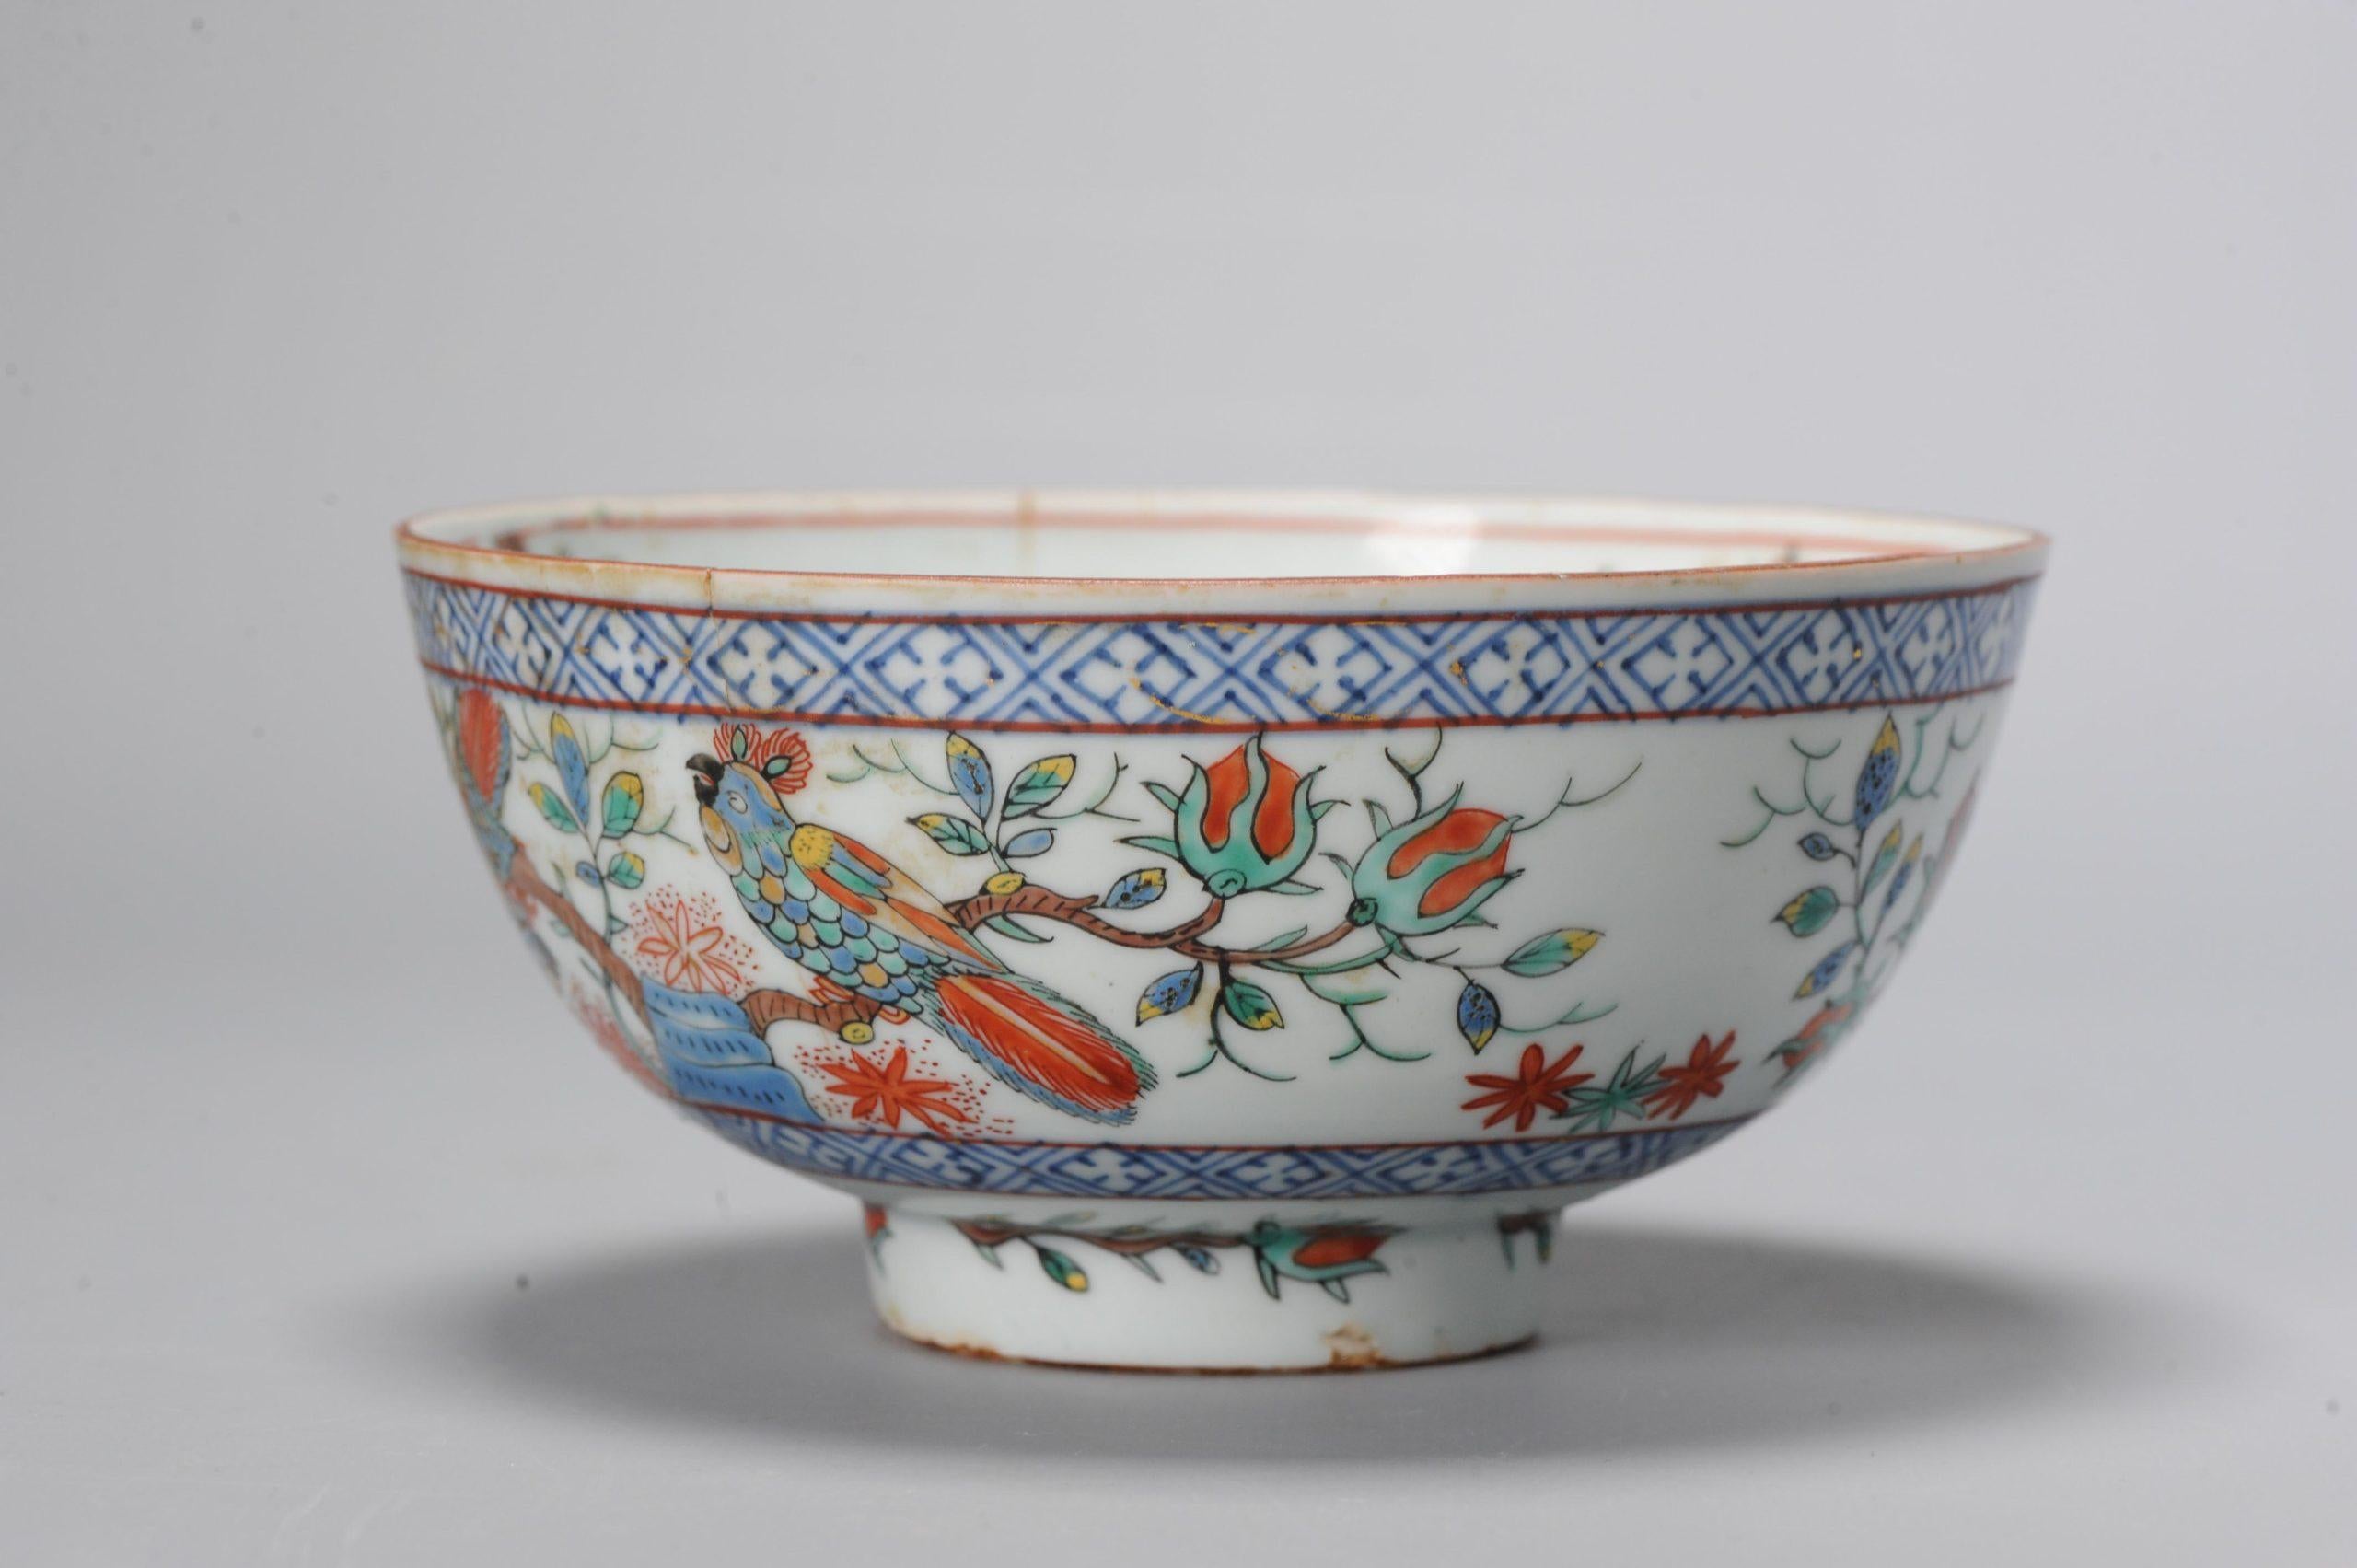 A very nicely made 18th century Kangxi Amsterdam Bont porcelain bowl. With parrots, butterflies, flowers and fruits.

Additional information:
Material: Porcelain & Pottery
Category: Amsterdam Bont, Imari
Emperor: Qianlong (1735-1796)
Region of